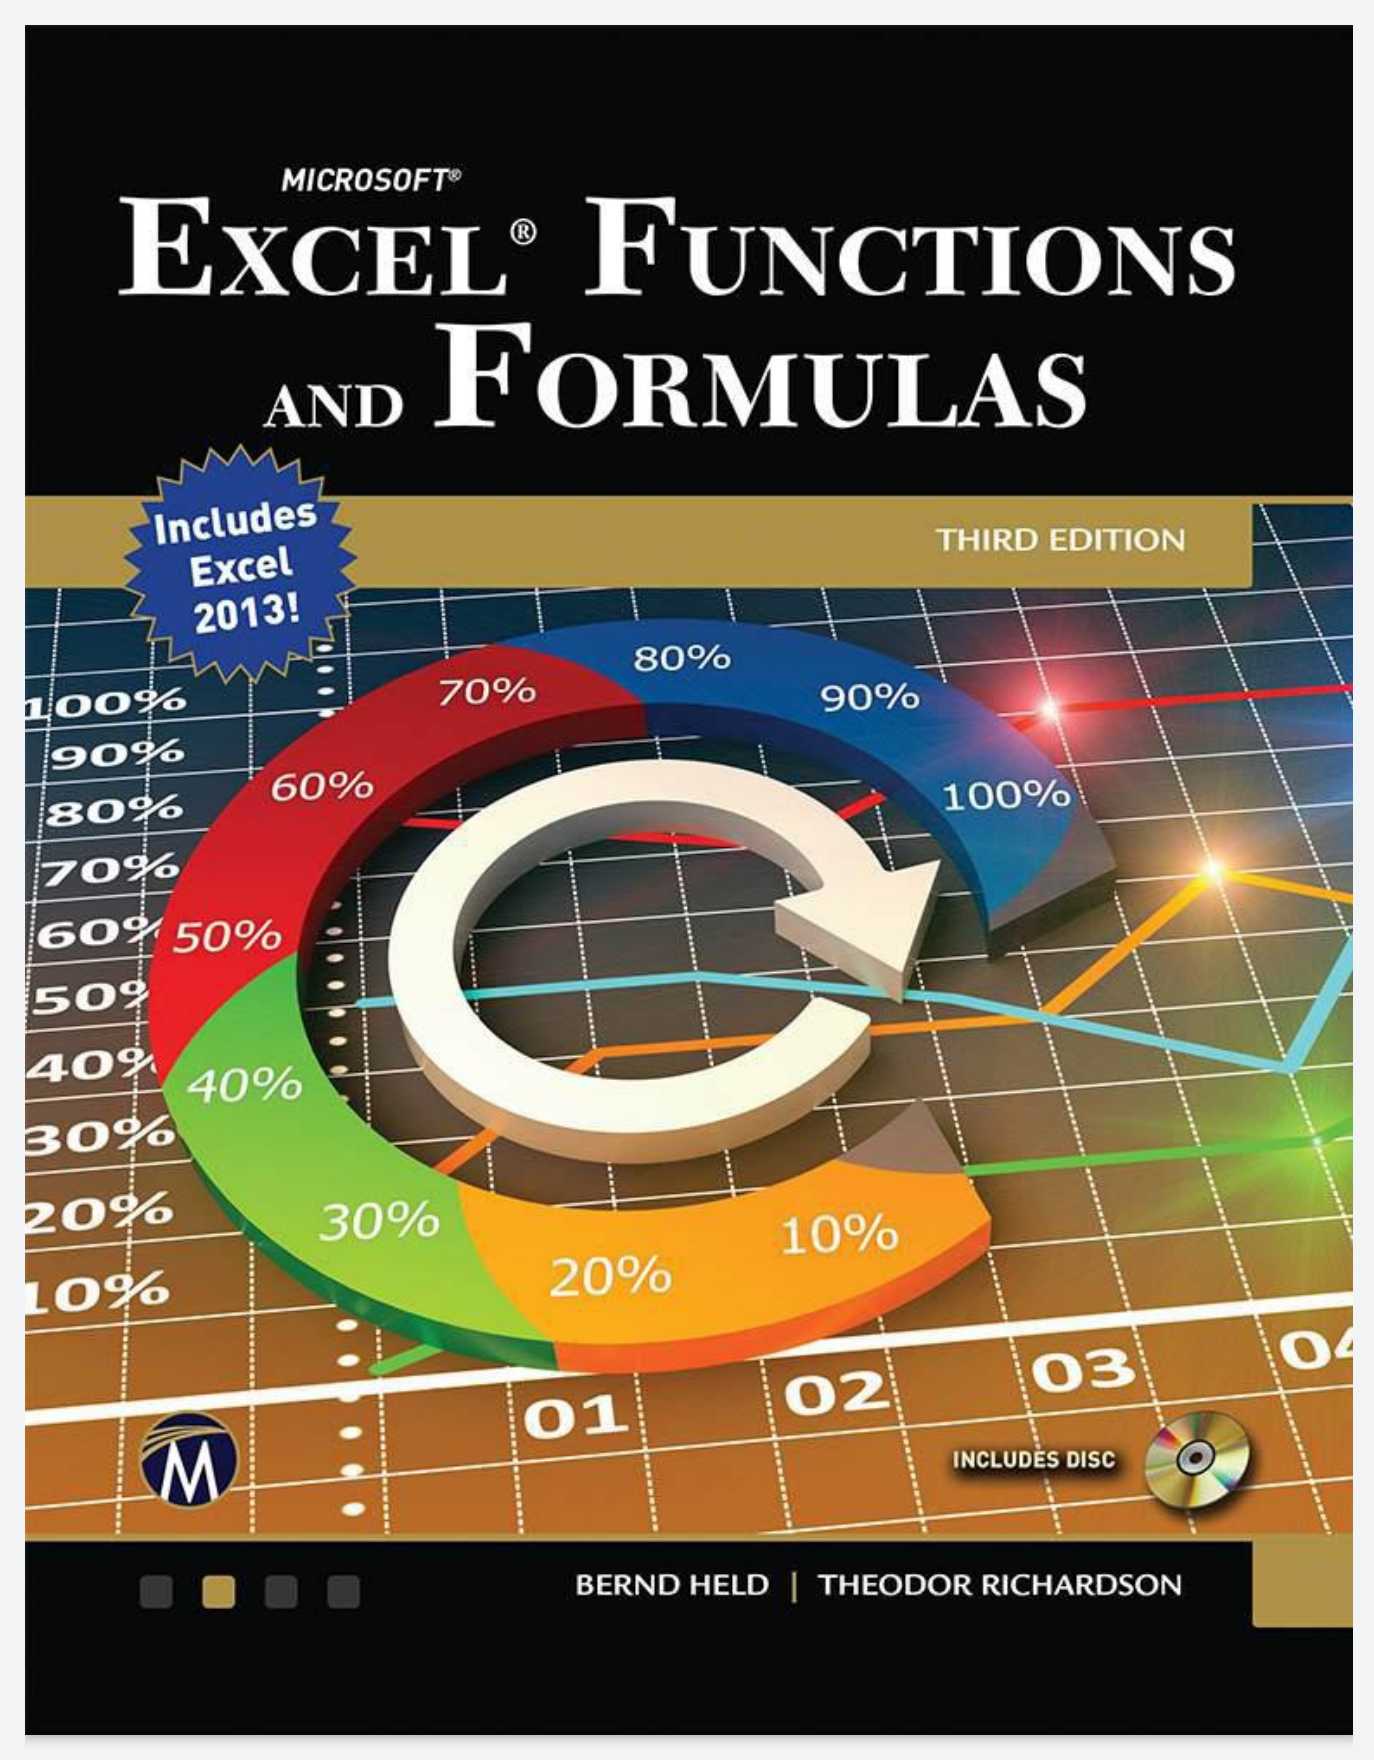 Microsoft Excel Functions and Formulas PDF